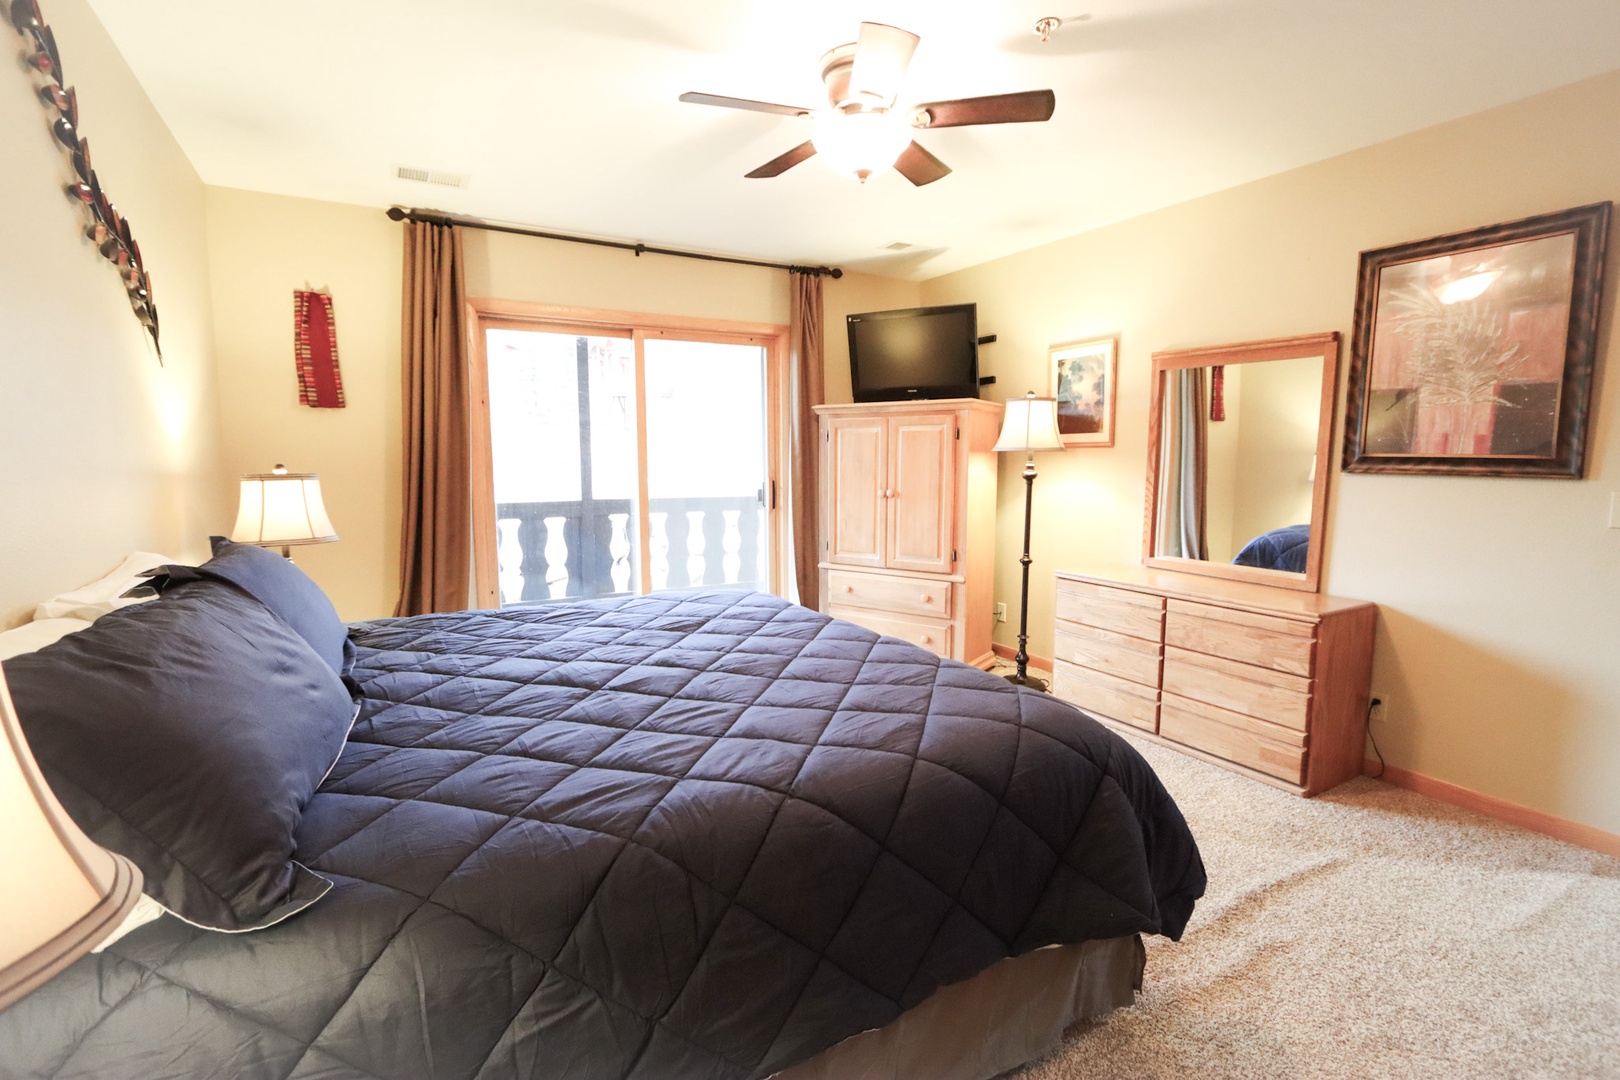 The large king bedroom includes a TV, ceiling fan, & balcony access